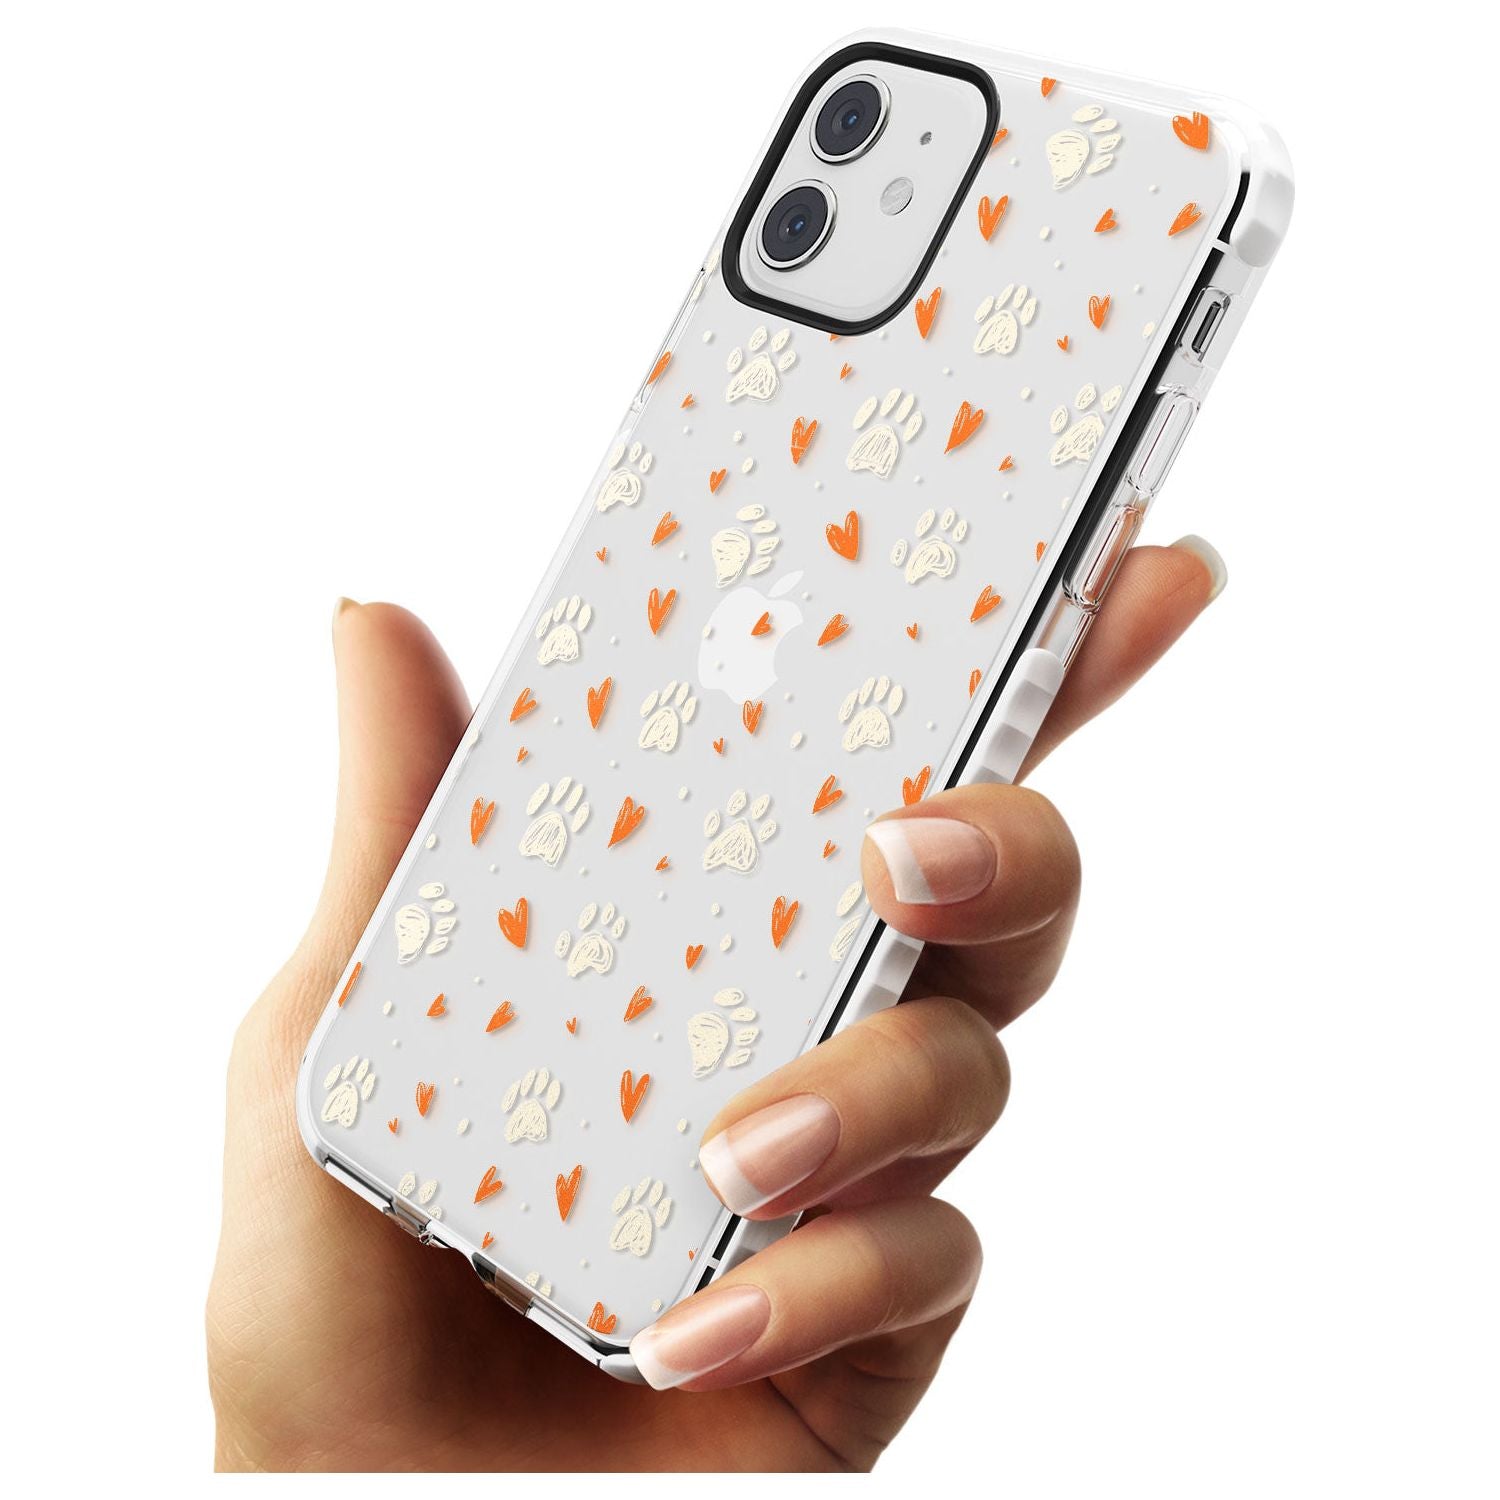 Paws & Hearts Pattern (Clear) Slim TPU Phone Case for iPhone 11